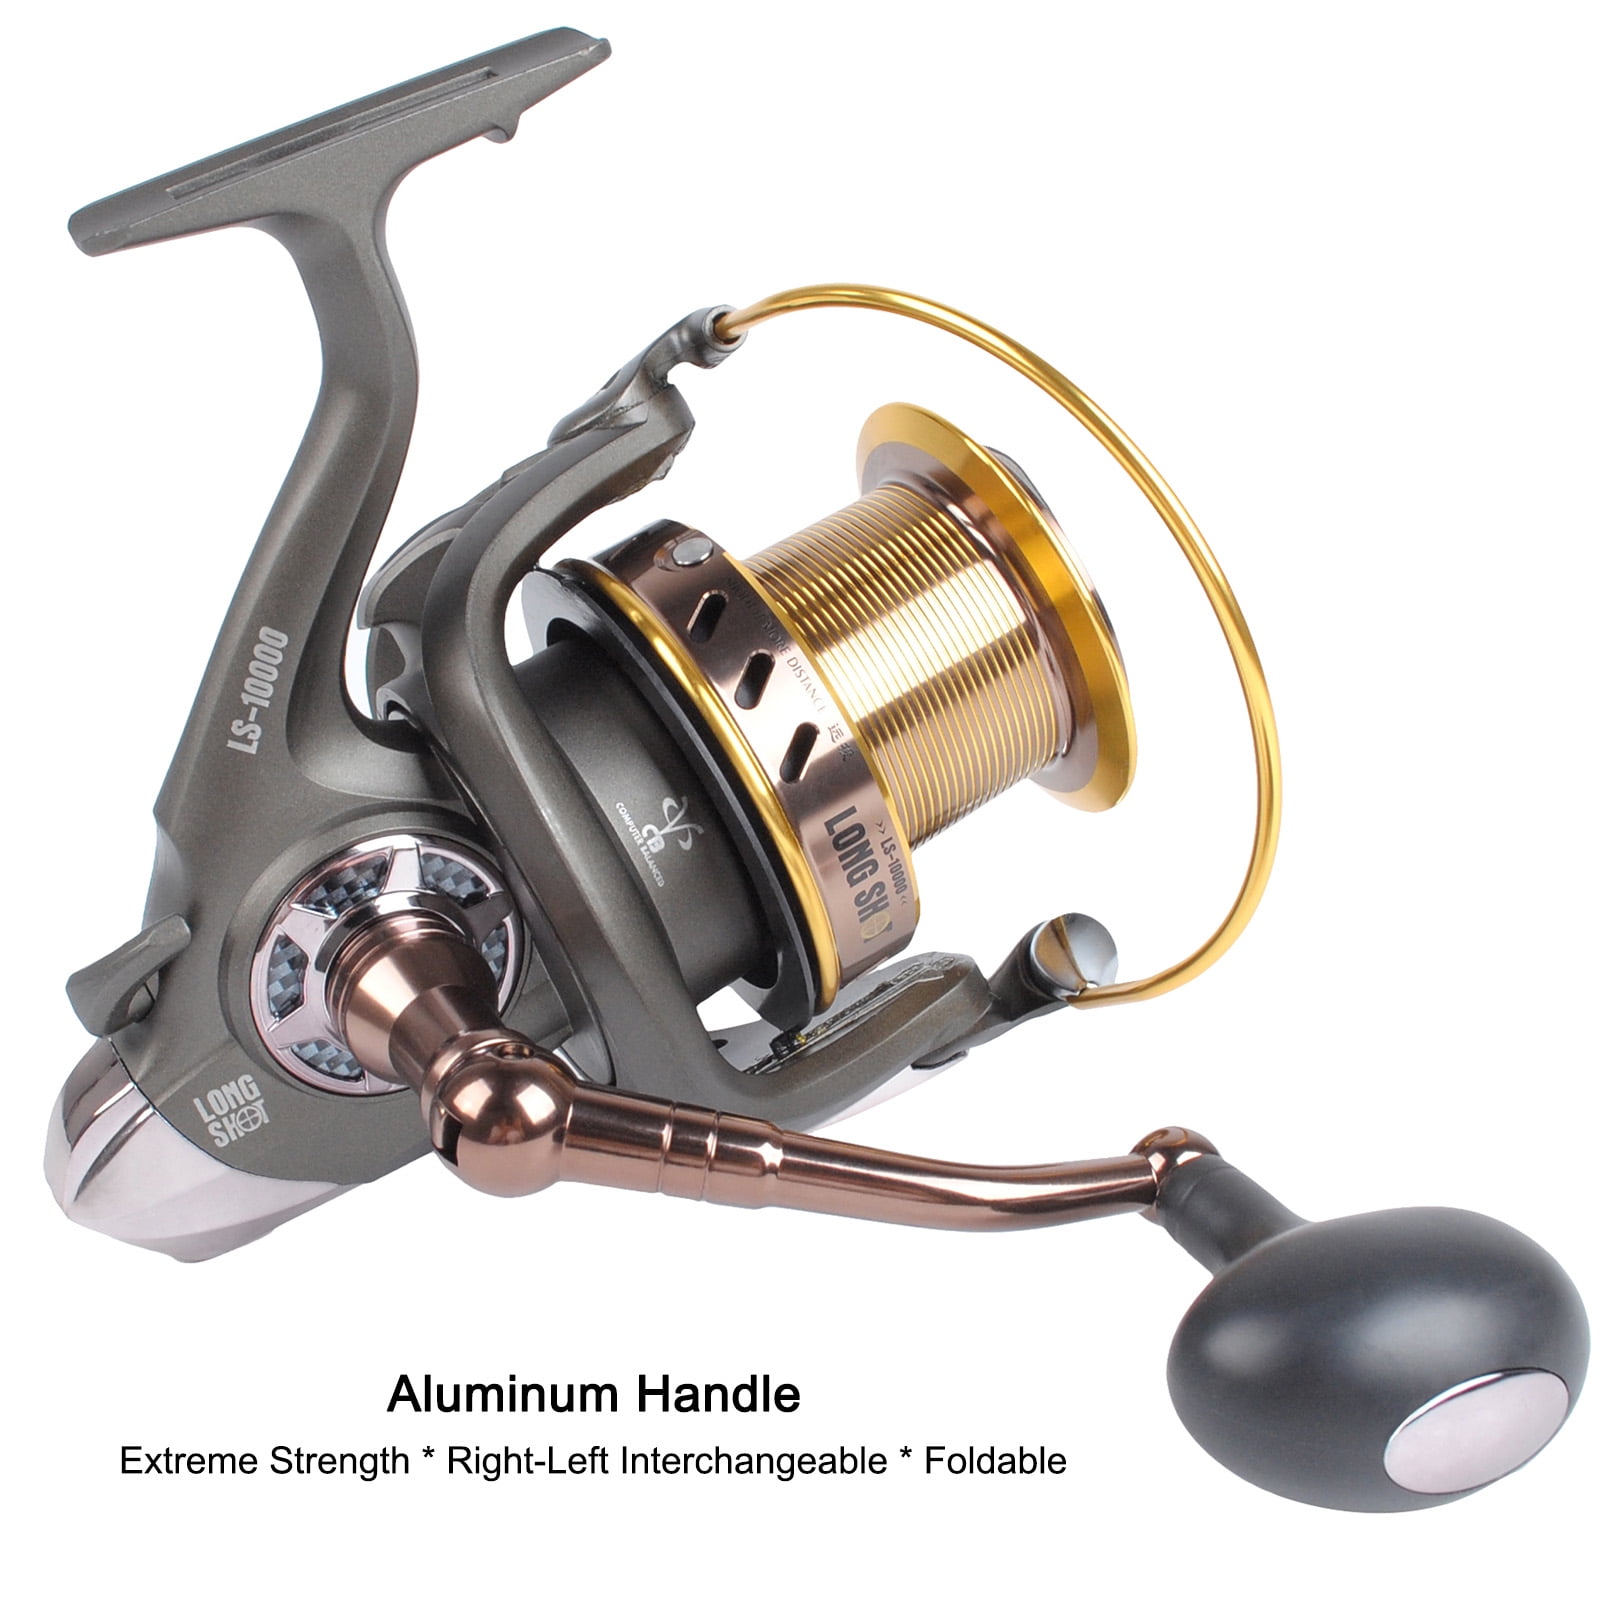 Dr.Fish Saltwater 10000/12000 Spinning Reel for Surf Fishing, 13+1